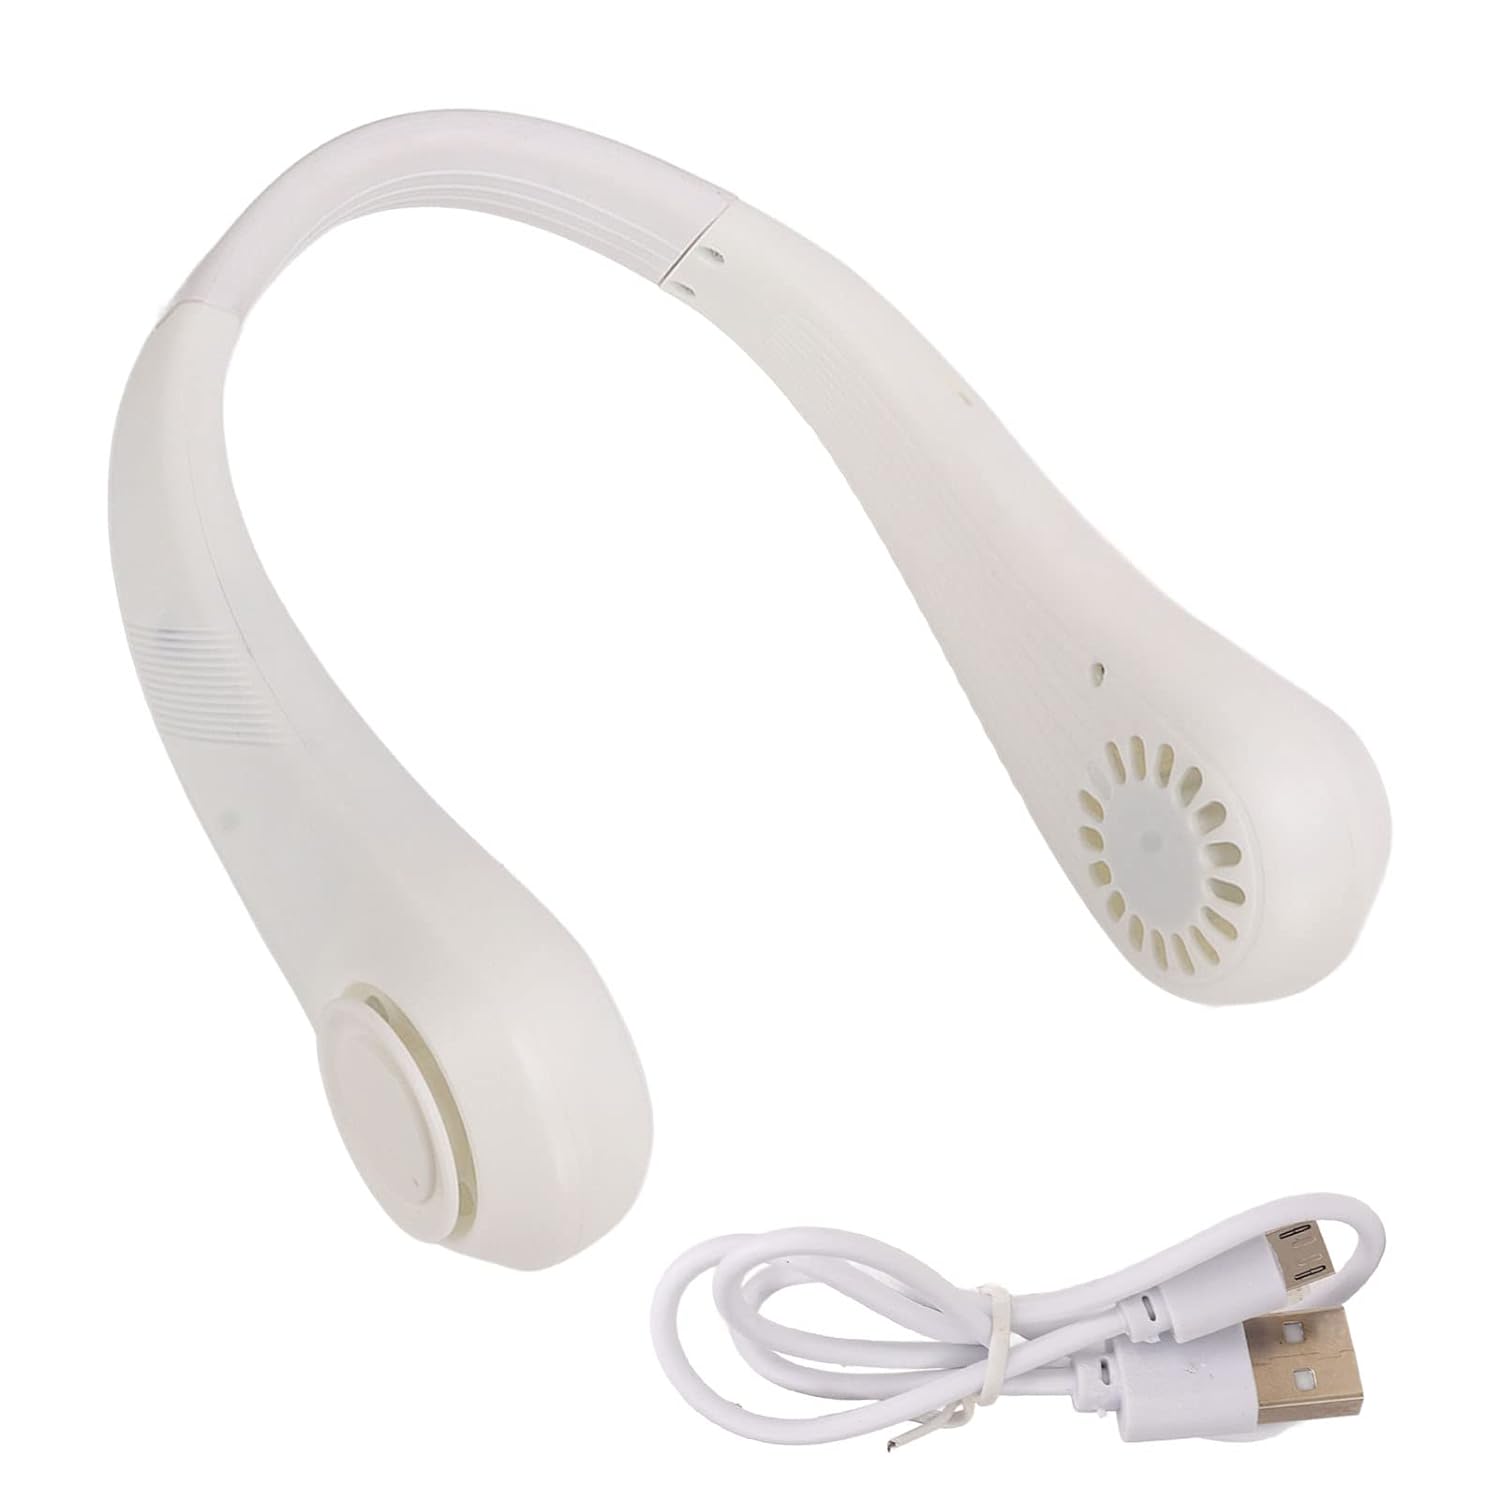 0876 Neck Fan, Portable and Wearable Personal Fan, USB Rechargeable, Headphone Design, Neckband Fan with 3 Speeds, suitable for outdoor family sports travel